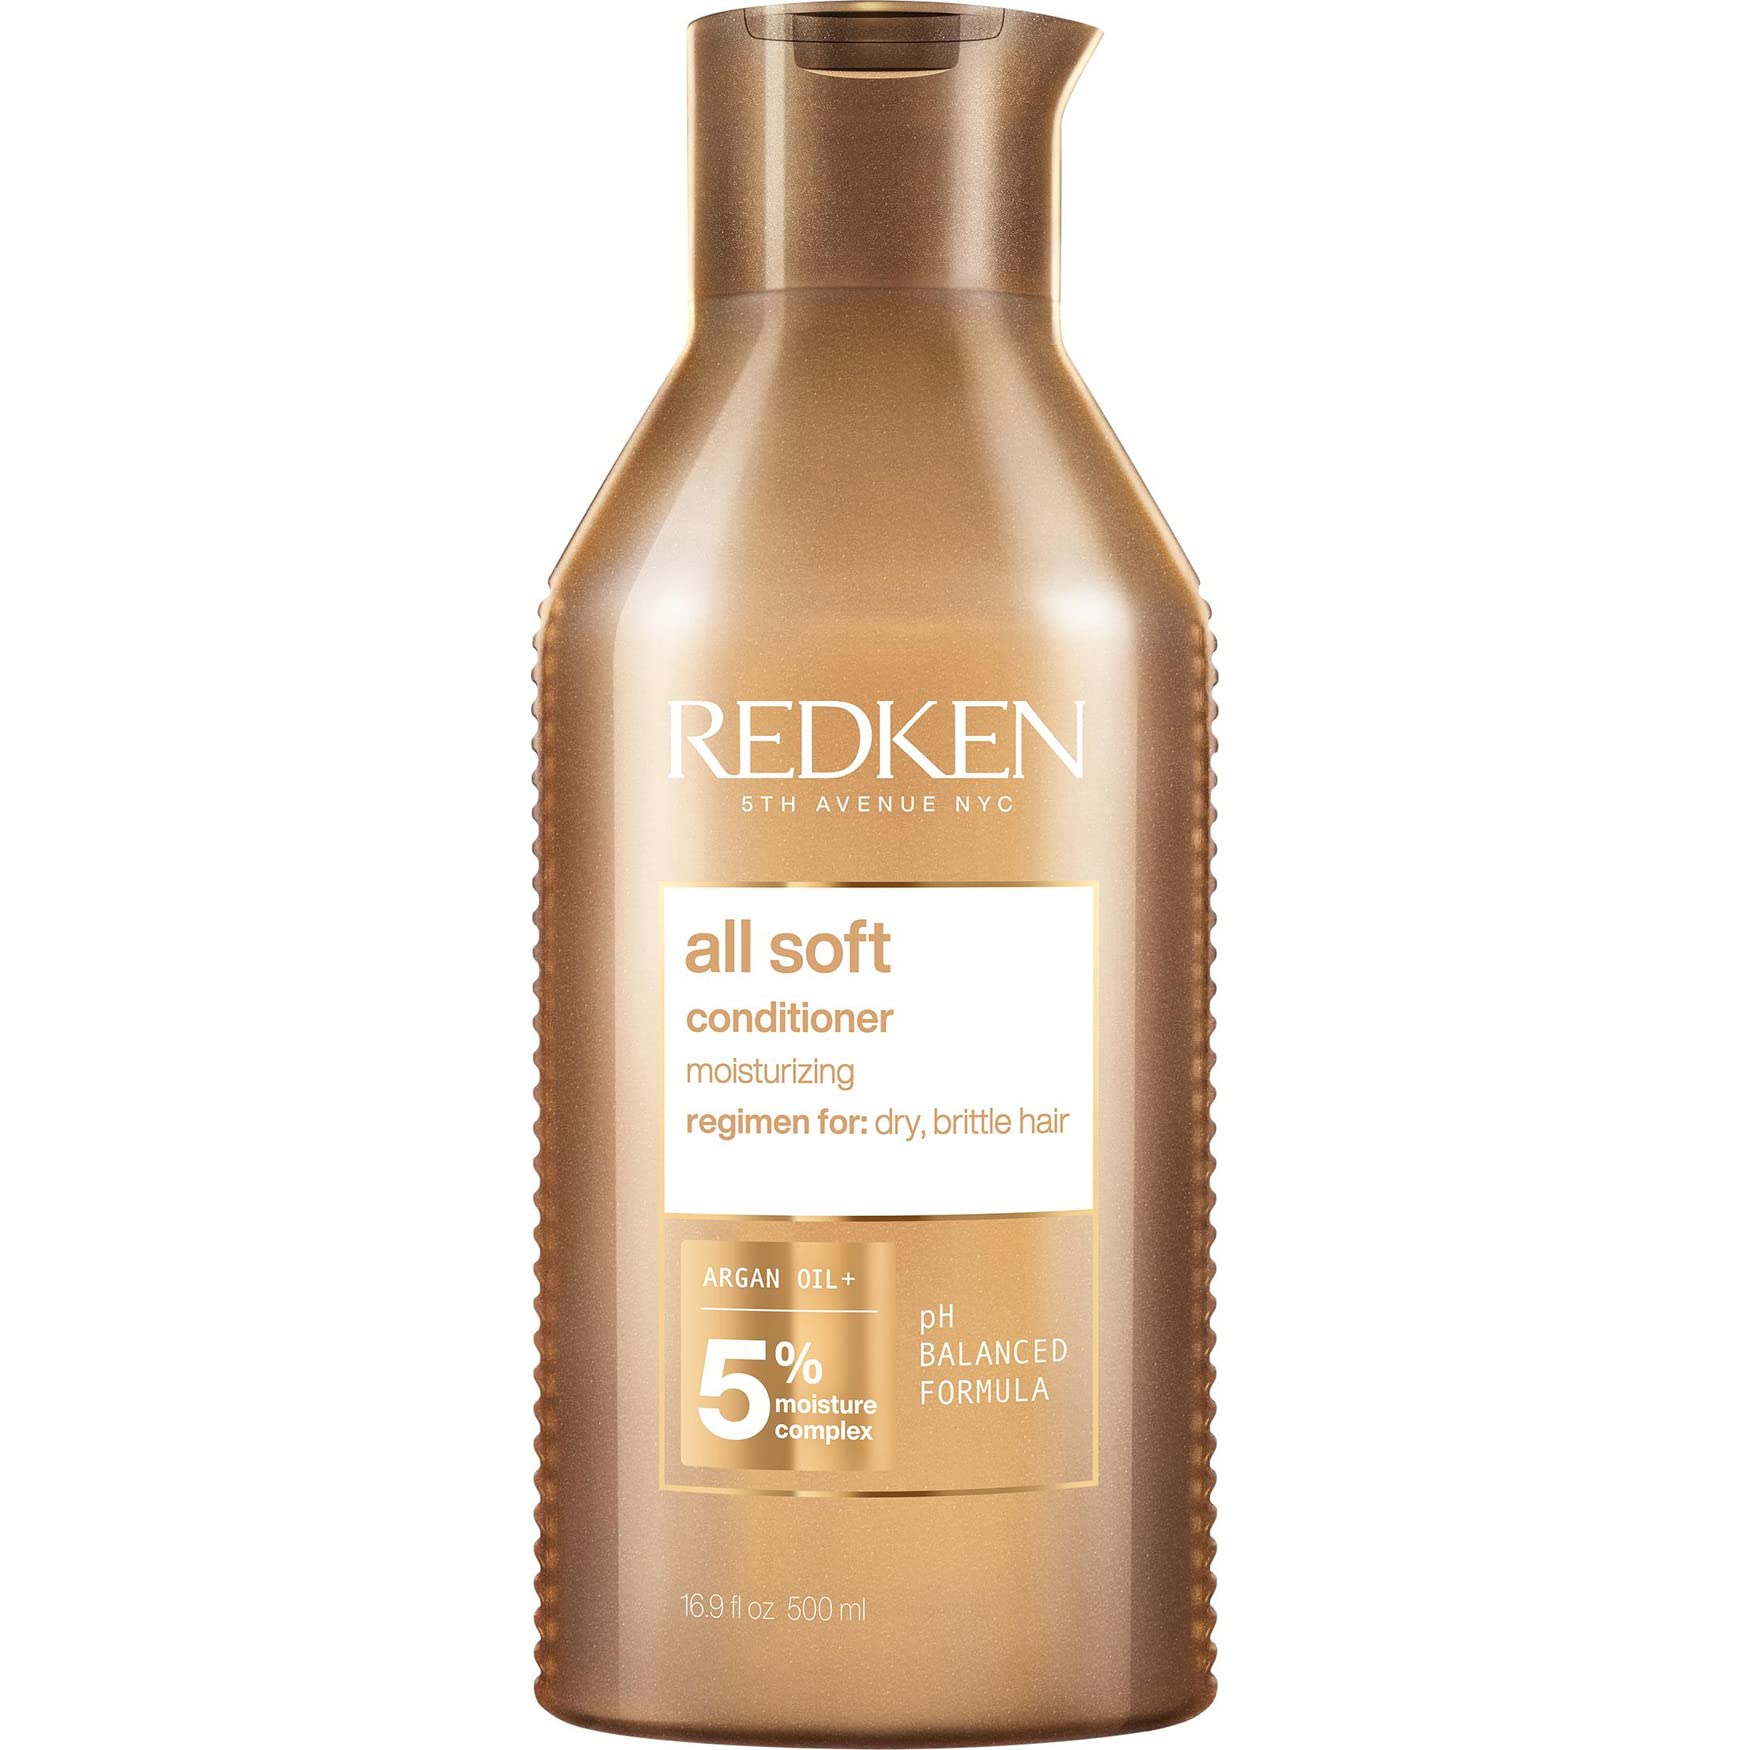 REDKEN All Soft Conditioner, for Dry Hair, Argan Oil, Intense Softness and Shine, 66 Percent More Inside, 500ml